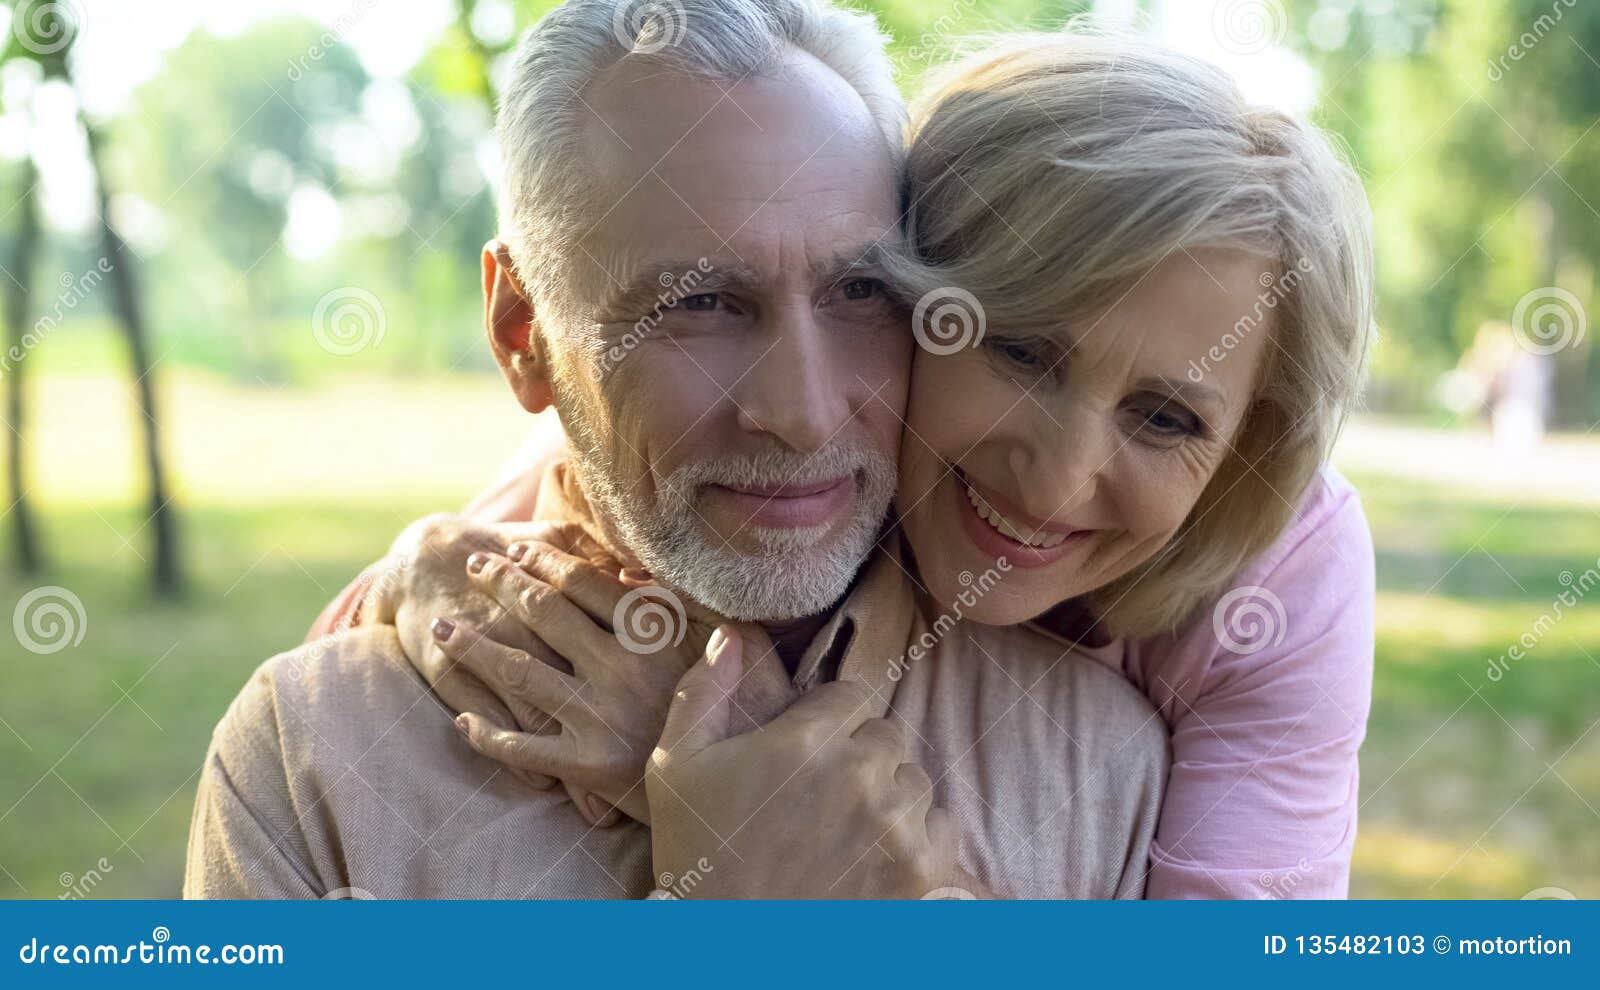 happy old couple hugging, resting in park together, grandparents closeness